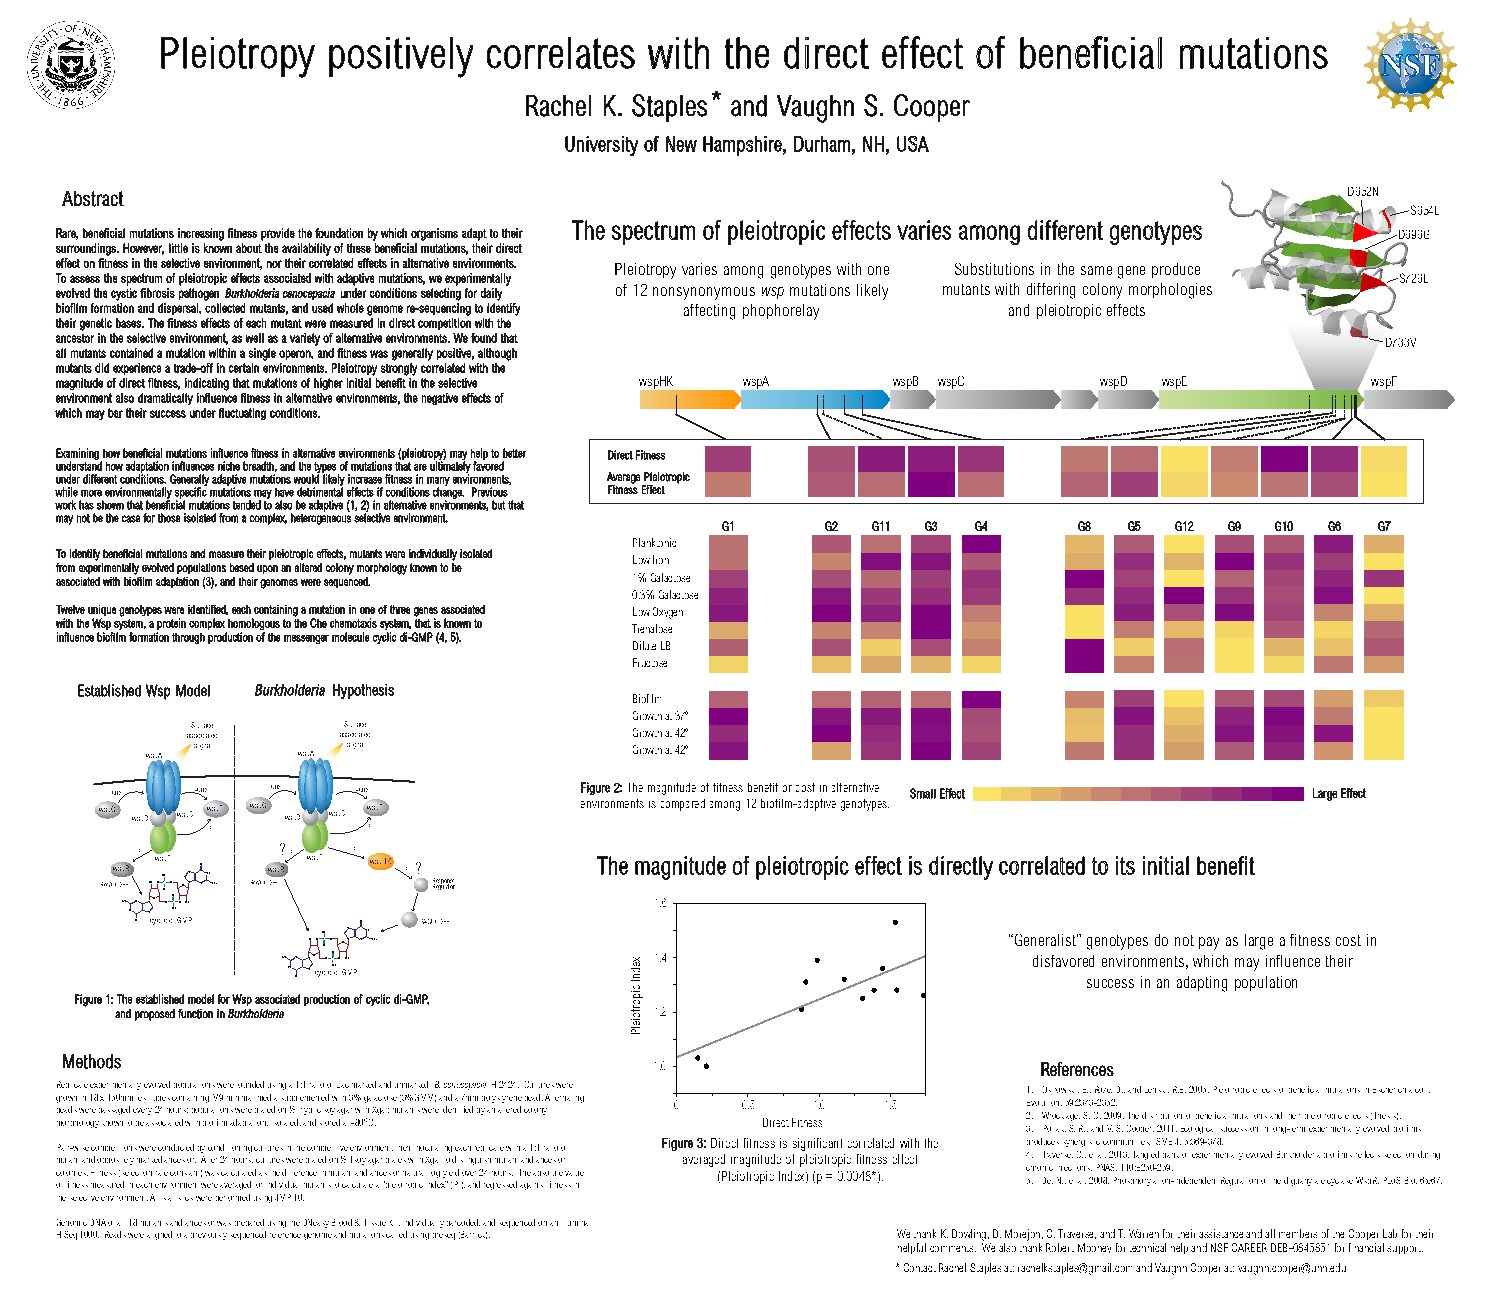 Pleiotropy Positively Correlates With The Direct Effect Of Beneficial Mutations by rs7